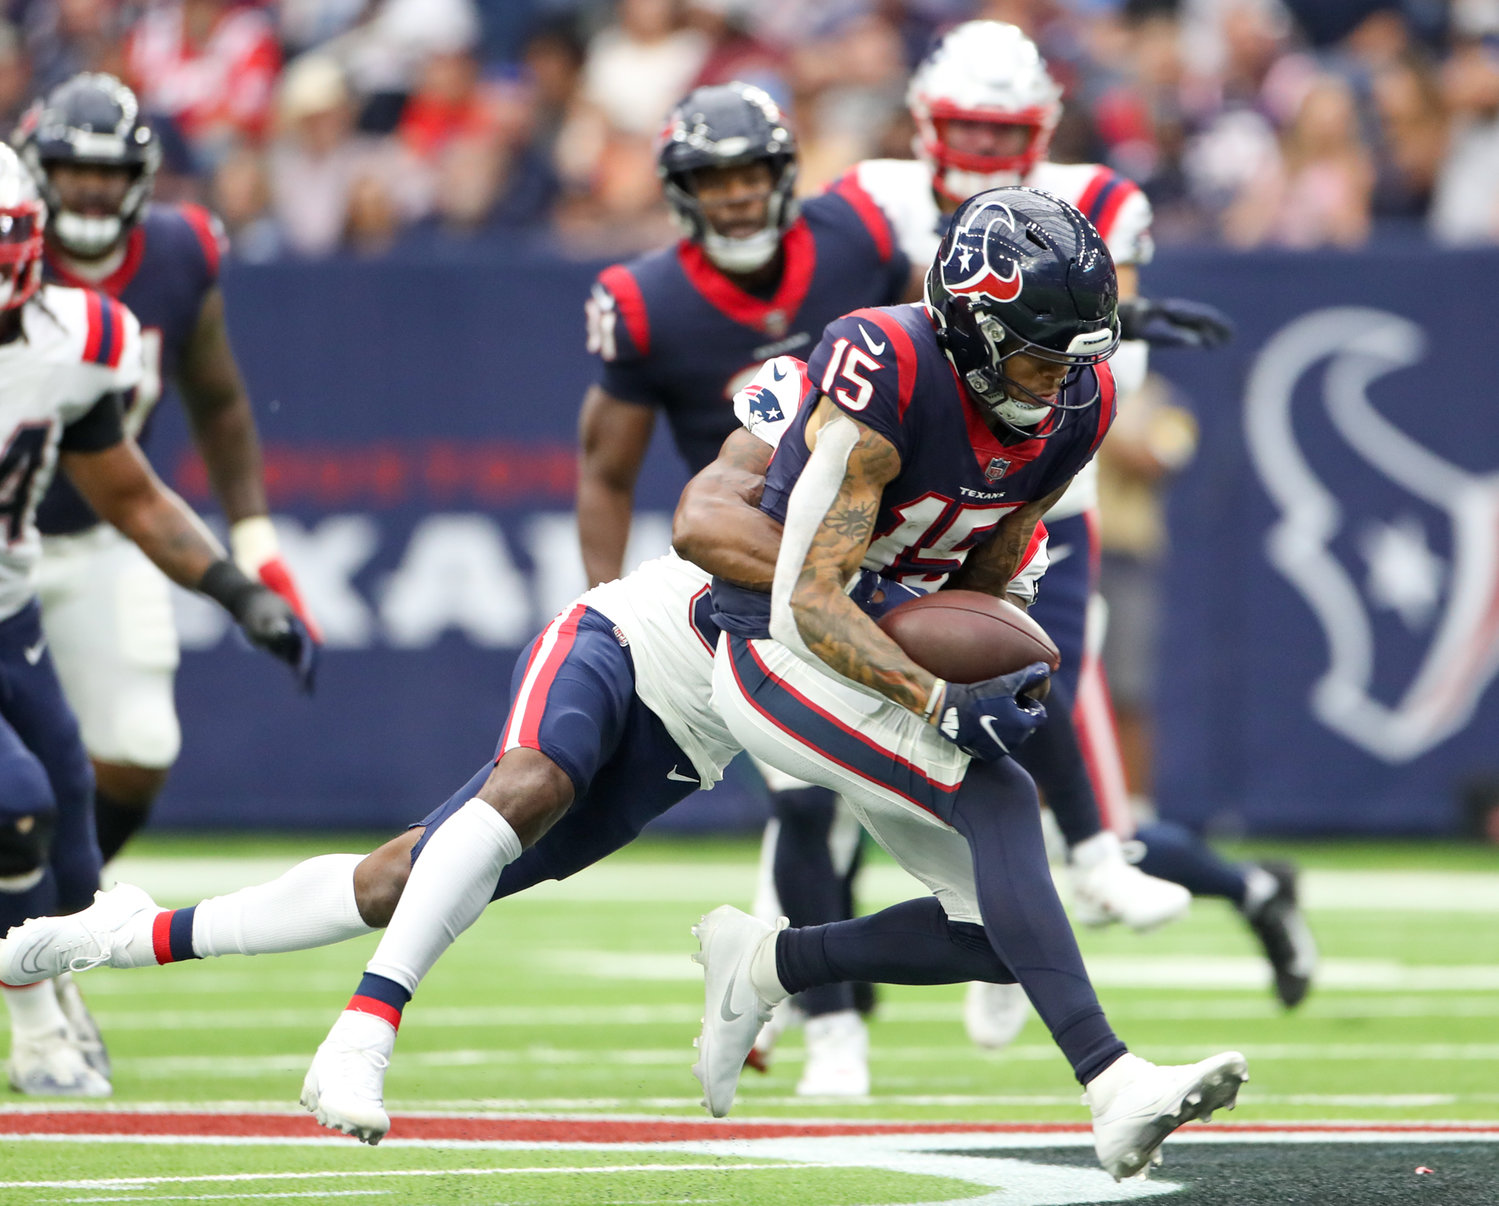 Houston Texans wide receiver Chris Moore (15) bobbles and then secures a pass during an NFL game between Houston and New England on October 10, 2021 in Houston, Texas. The Patriots won 25-22.